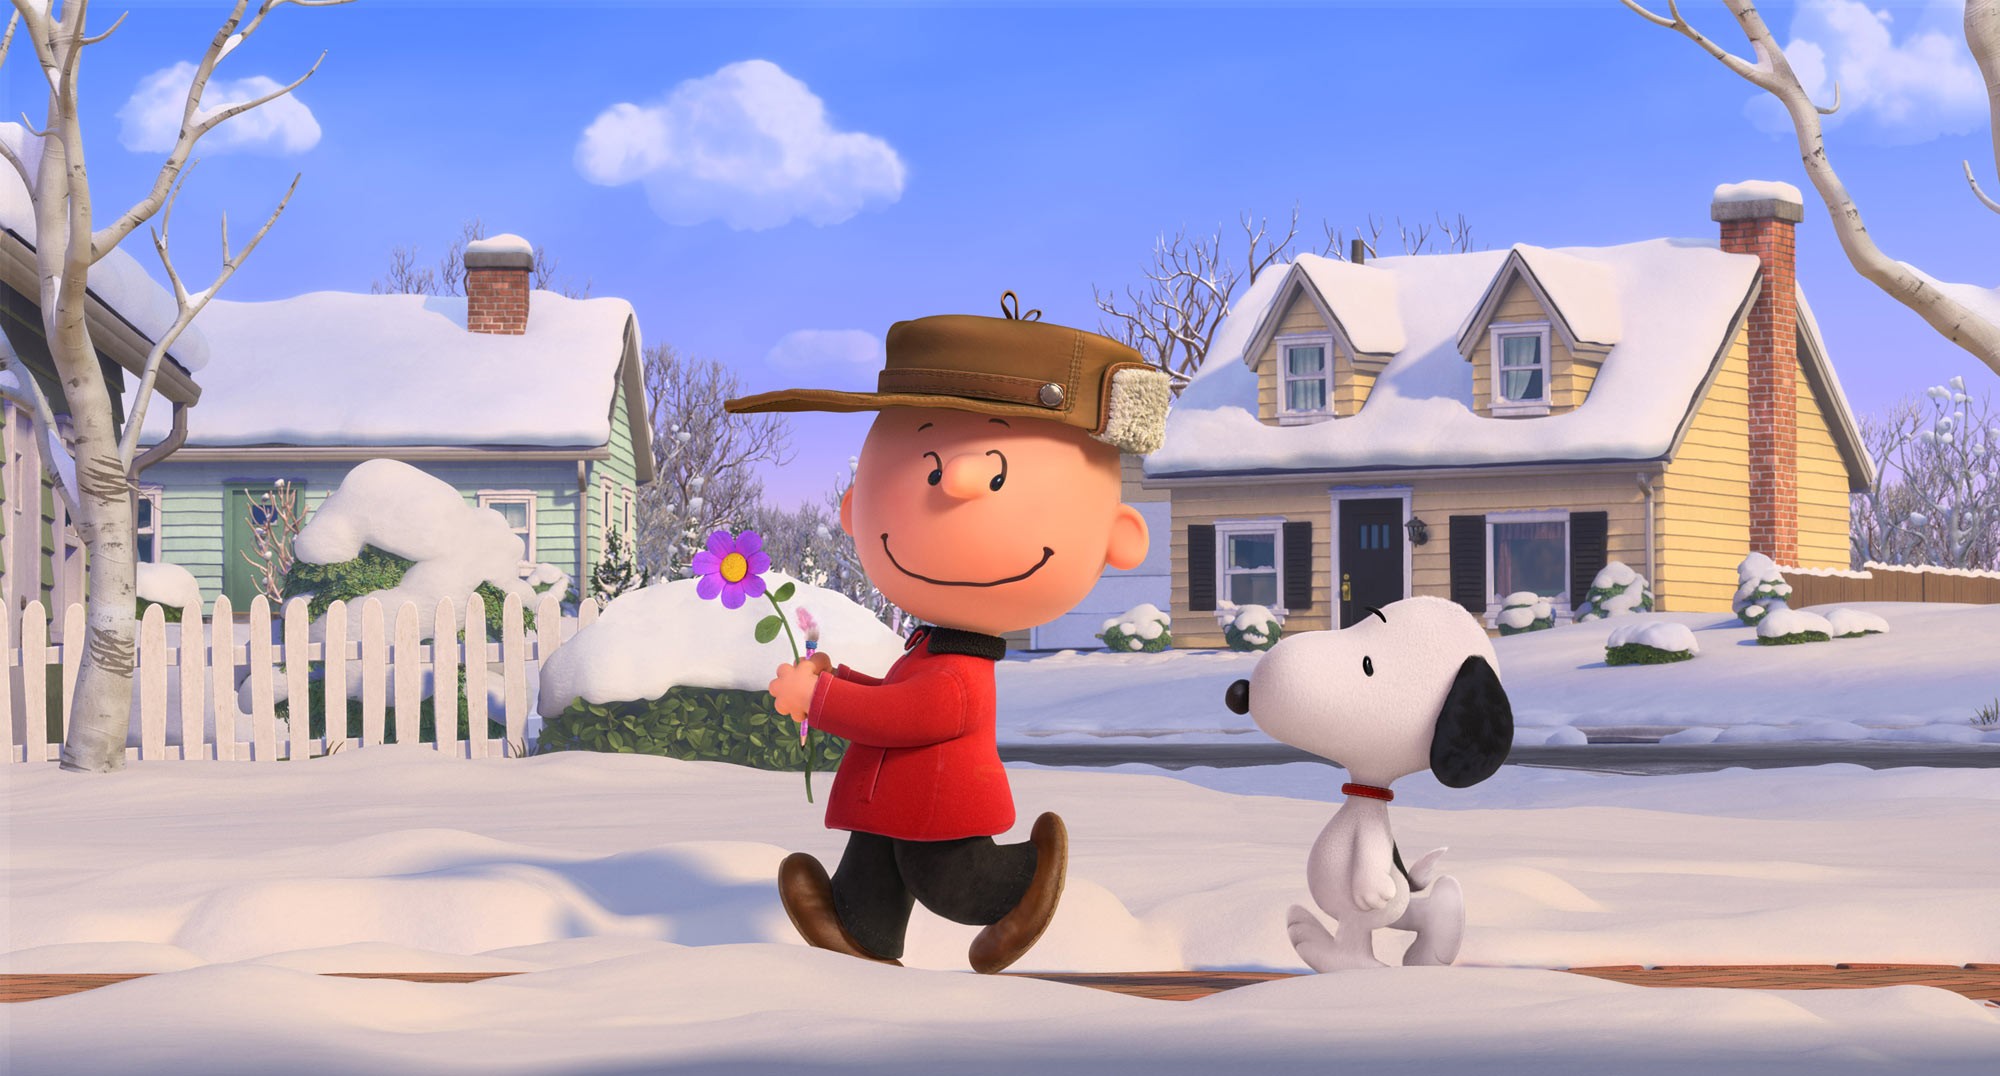 Wallpaper Ipod/iphone - Art & Making Of The Peanuts Movie Animated , HD Wallpaper & Backgrounds